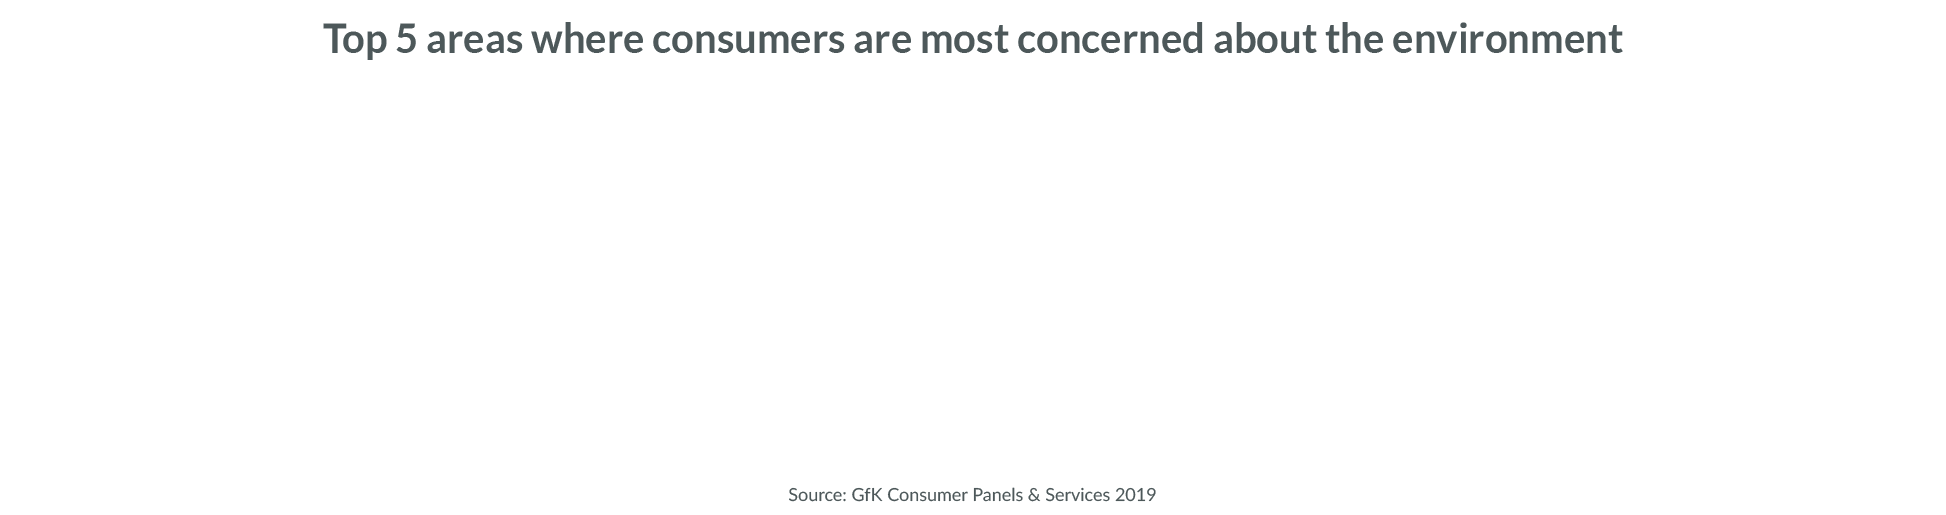 Consumers-concerned-about-environment-v3